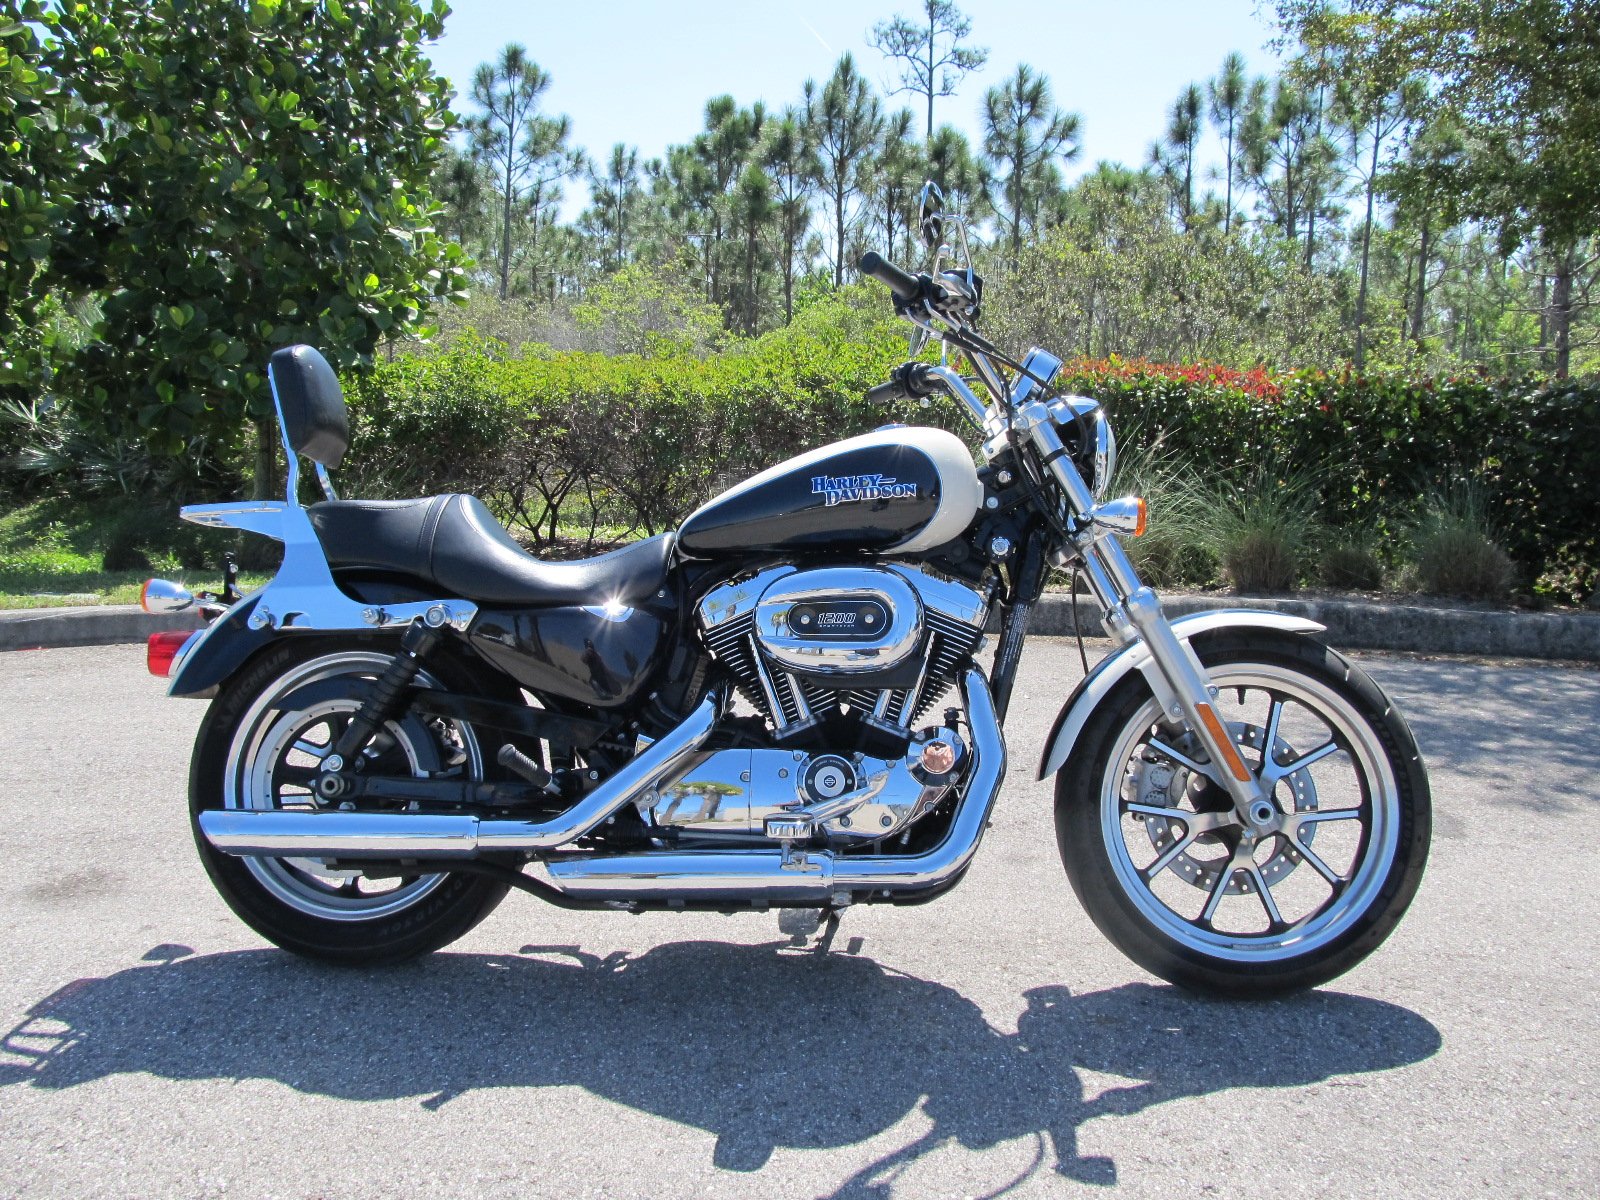 Pre-Owned 2014 Harley-Davidson Sportster Superlow 1200T XL1200T